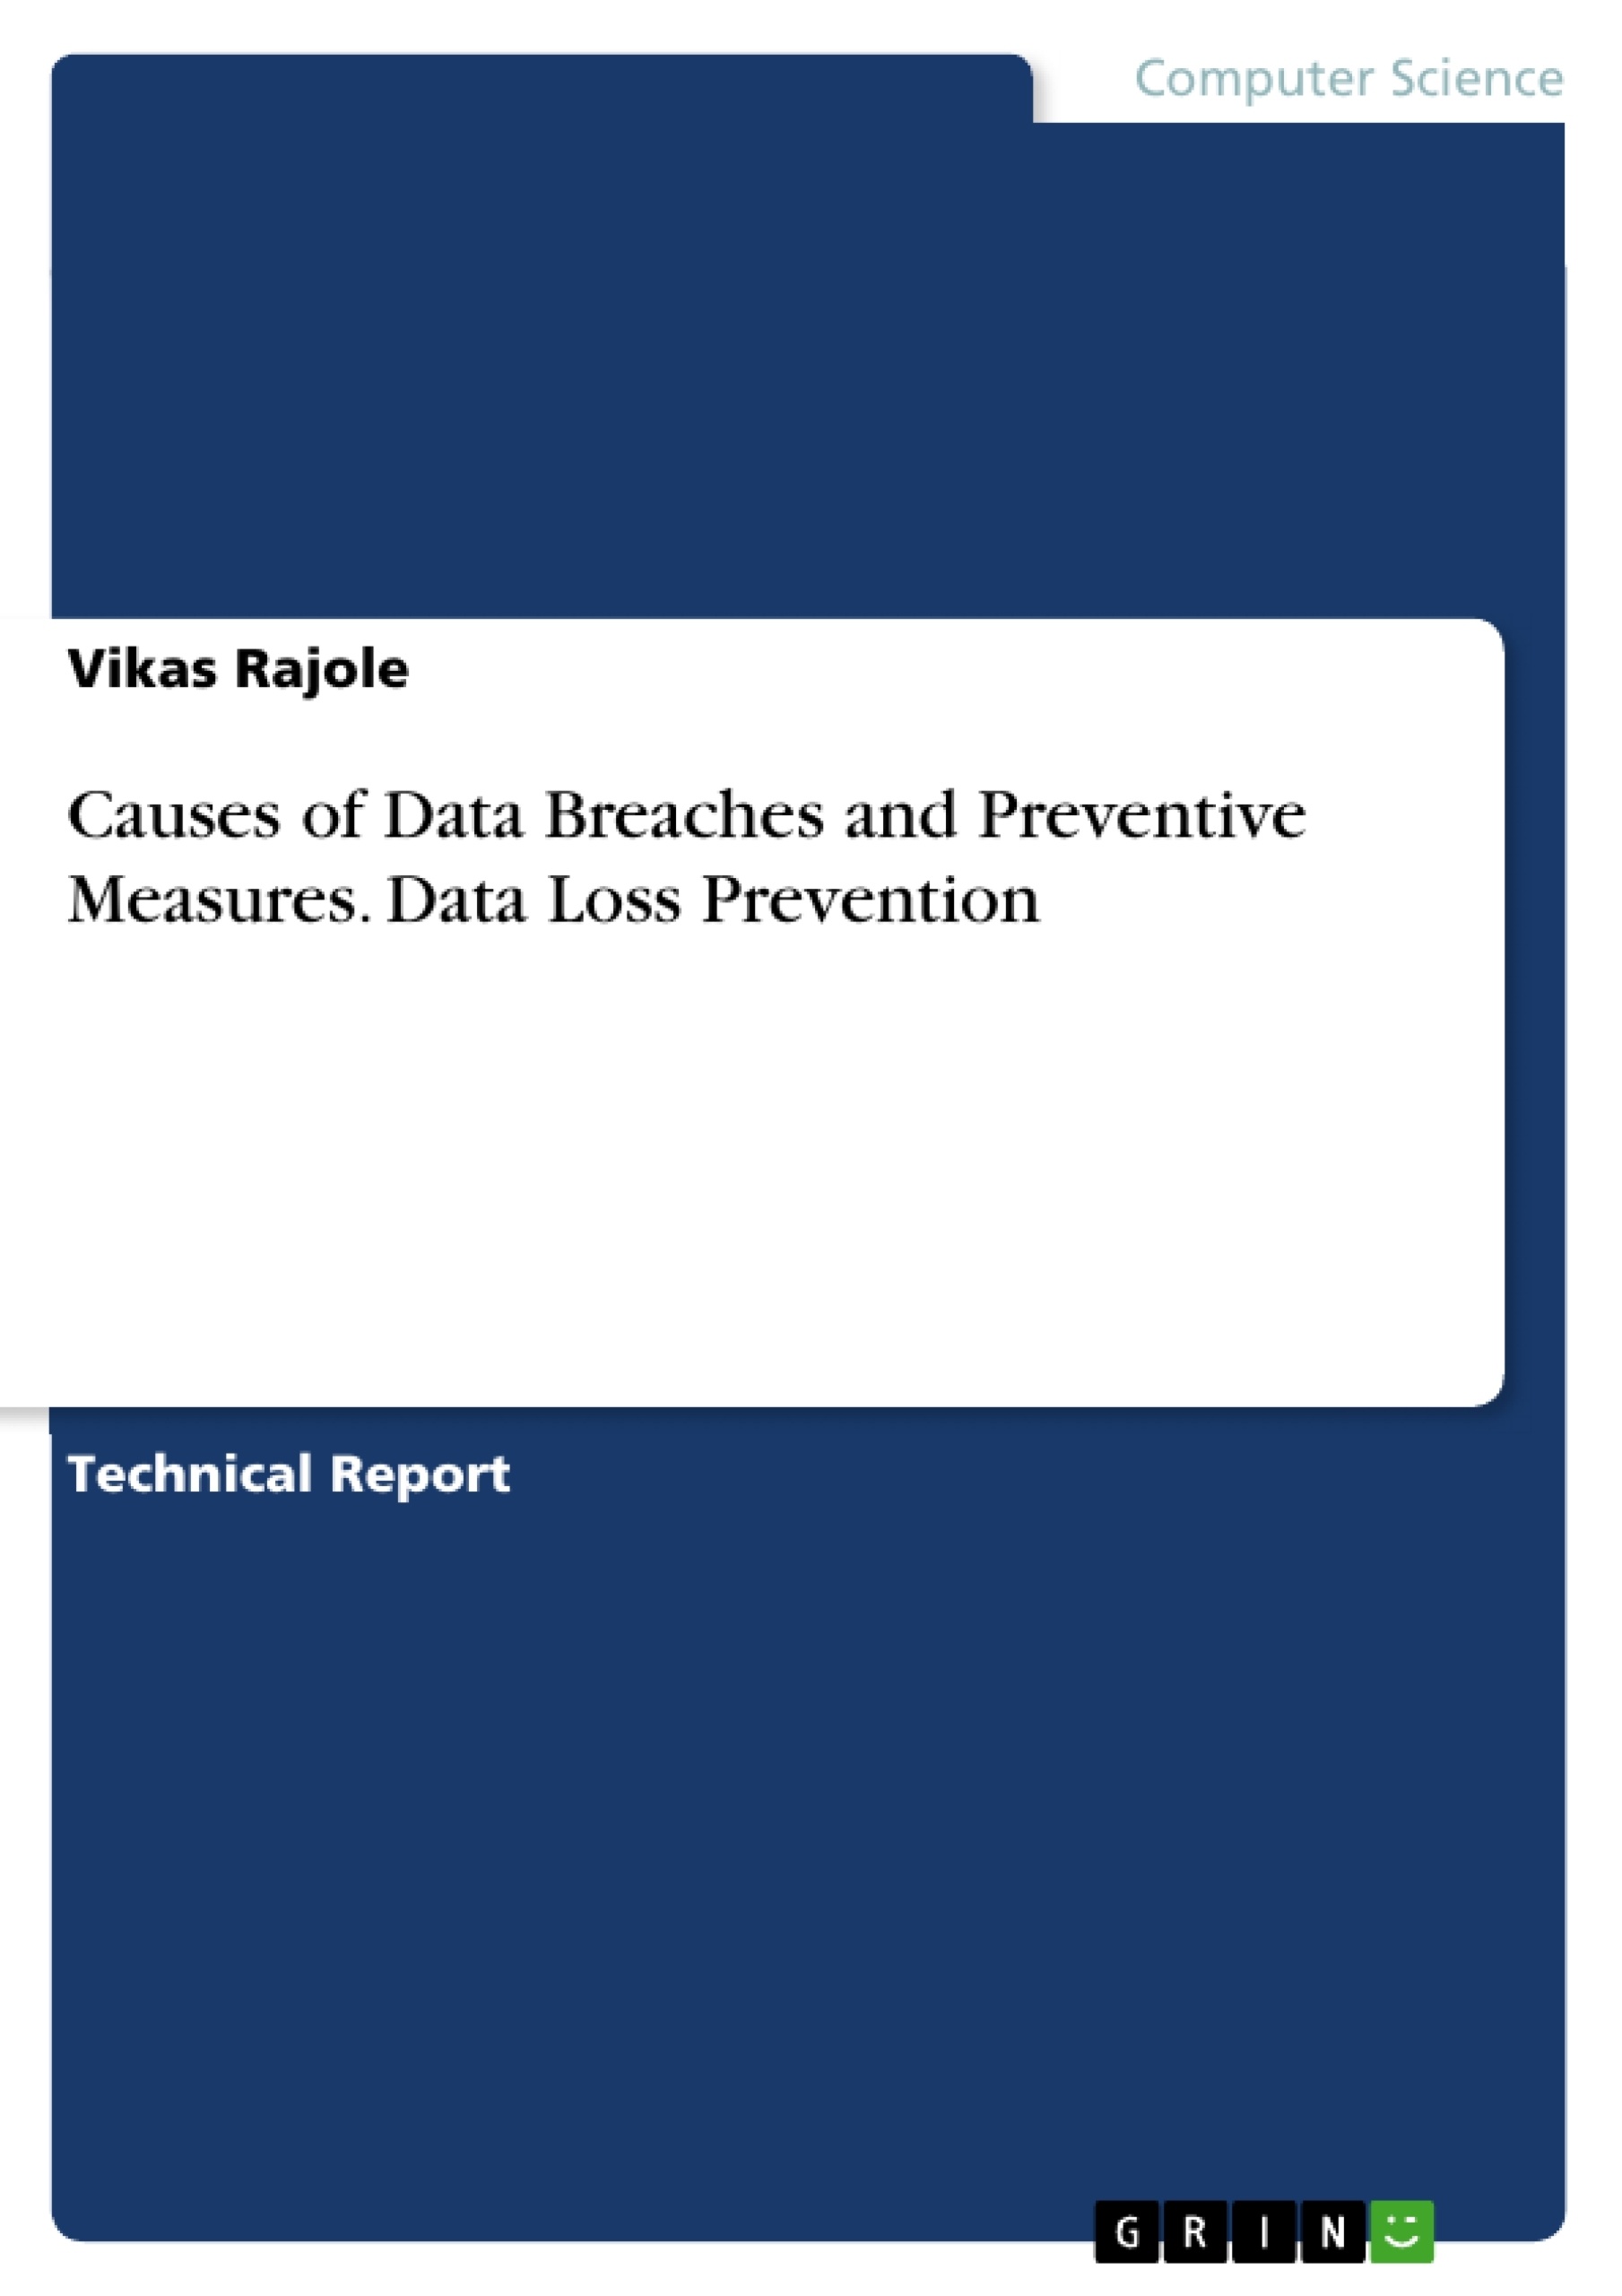 Titel: Causes of Data Breaches and Preventive Measures. Data Loss Prevention